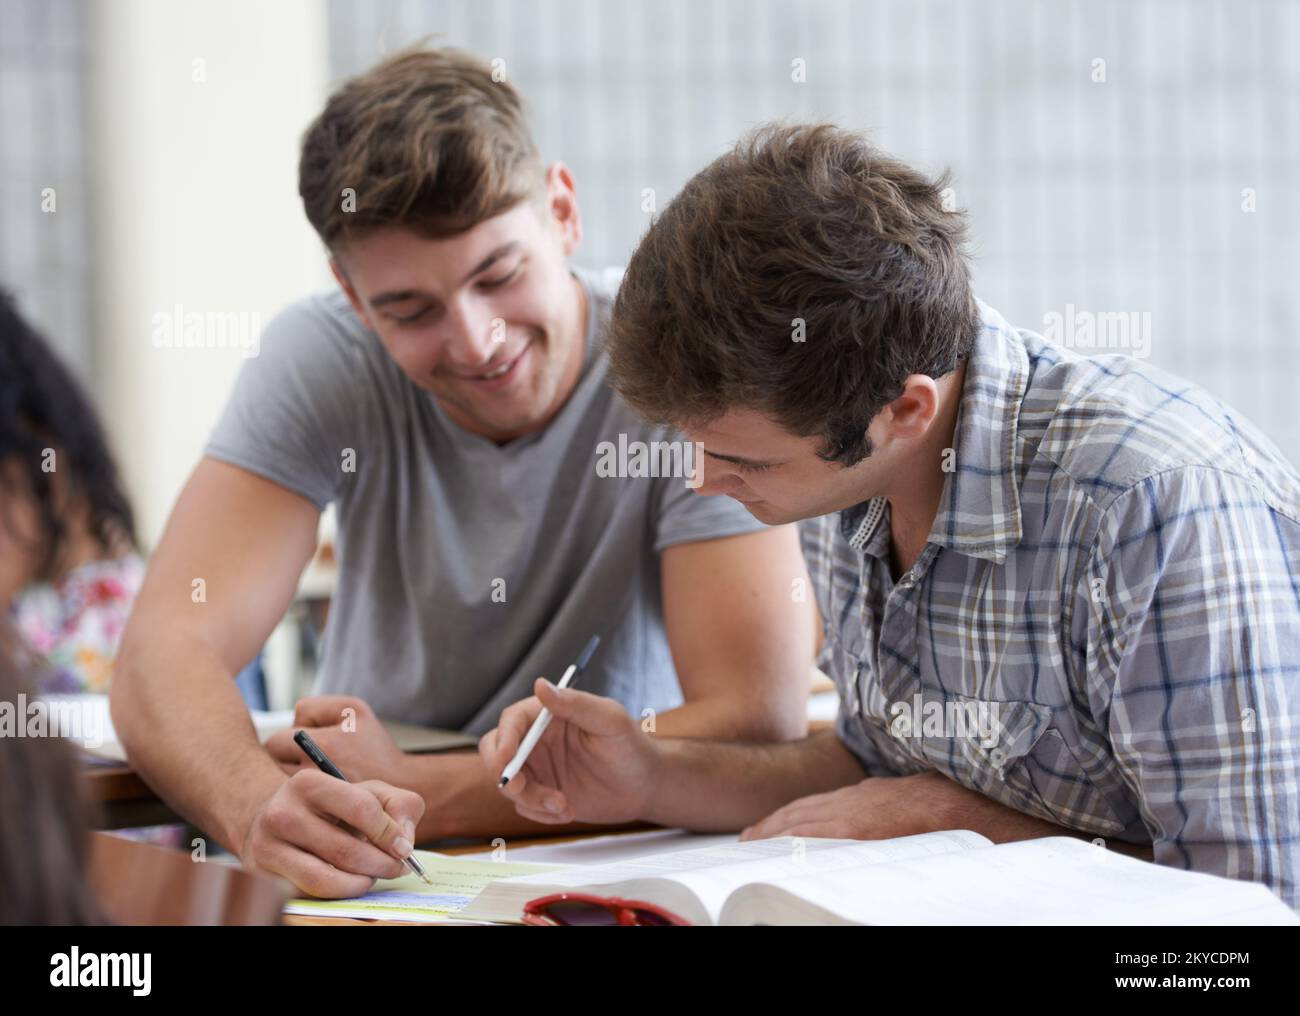 Comparing their assignment notes. a university students studying in class. Stock Photo